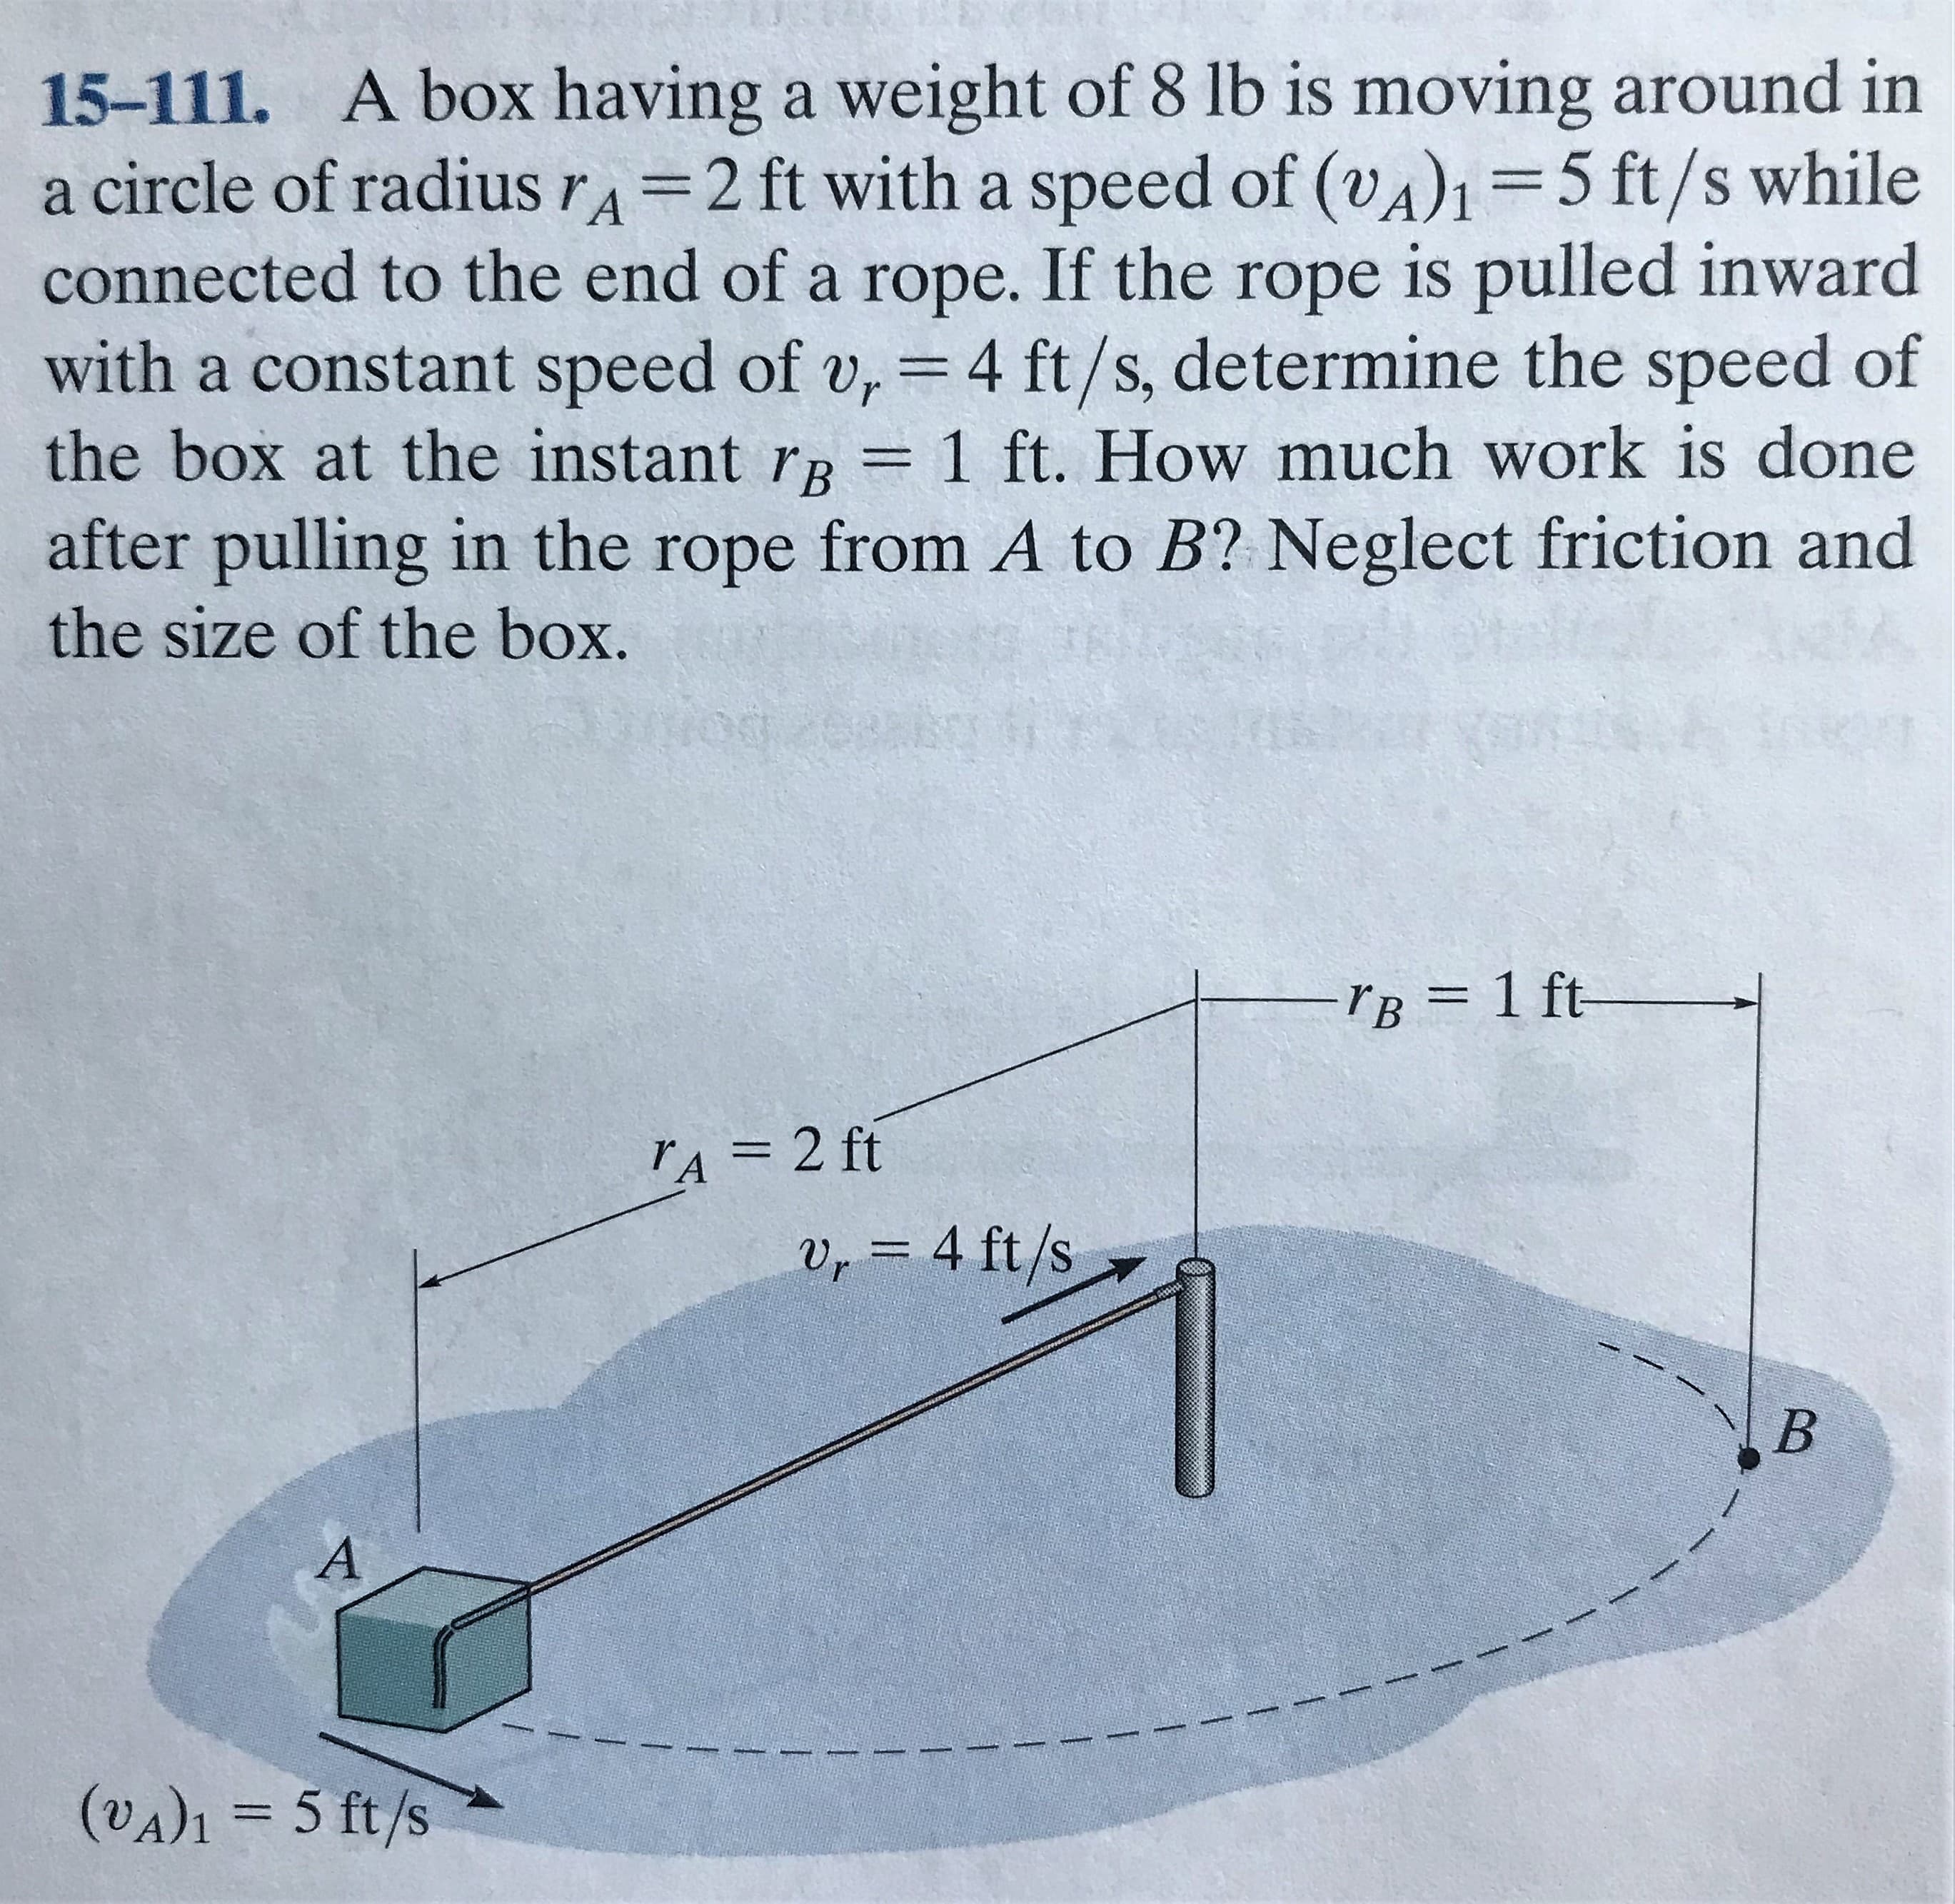 15-111. A box having a weight of 8 lb is moving around in
a circle of radius rA=2 ft with a speed of (vA)1=5 ft/s while
connected to the end of a rope. If the rope is pulled inward
with a constant speed of v, =4 ft/s, determine the speed of
the box at the instant rR = 1 ft. How much work is done
after pulling in the rope from A to B? Neglect friction and
the size of the box.
%3D
%3|
%3D
-TB = 1 ft-
%3D
rA = 2 ft
%3D
Vr = 4 ft/s
(VA)1 = 5 ft/s
